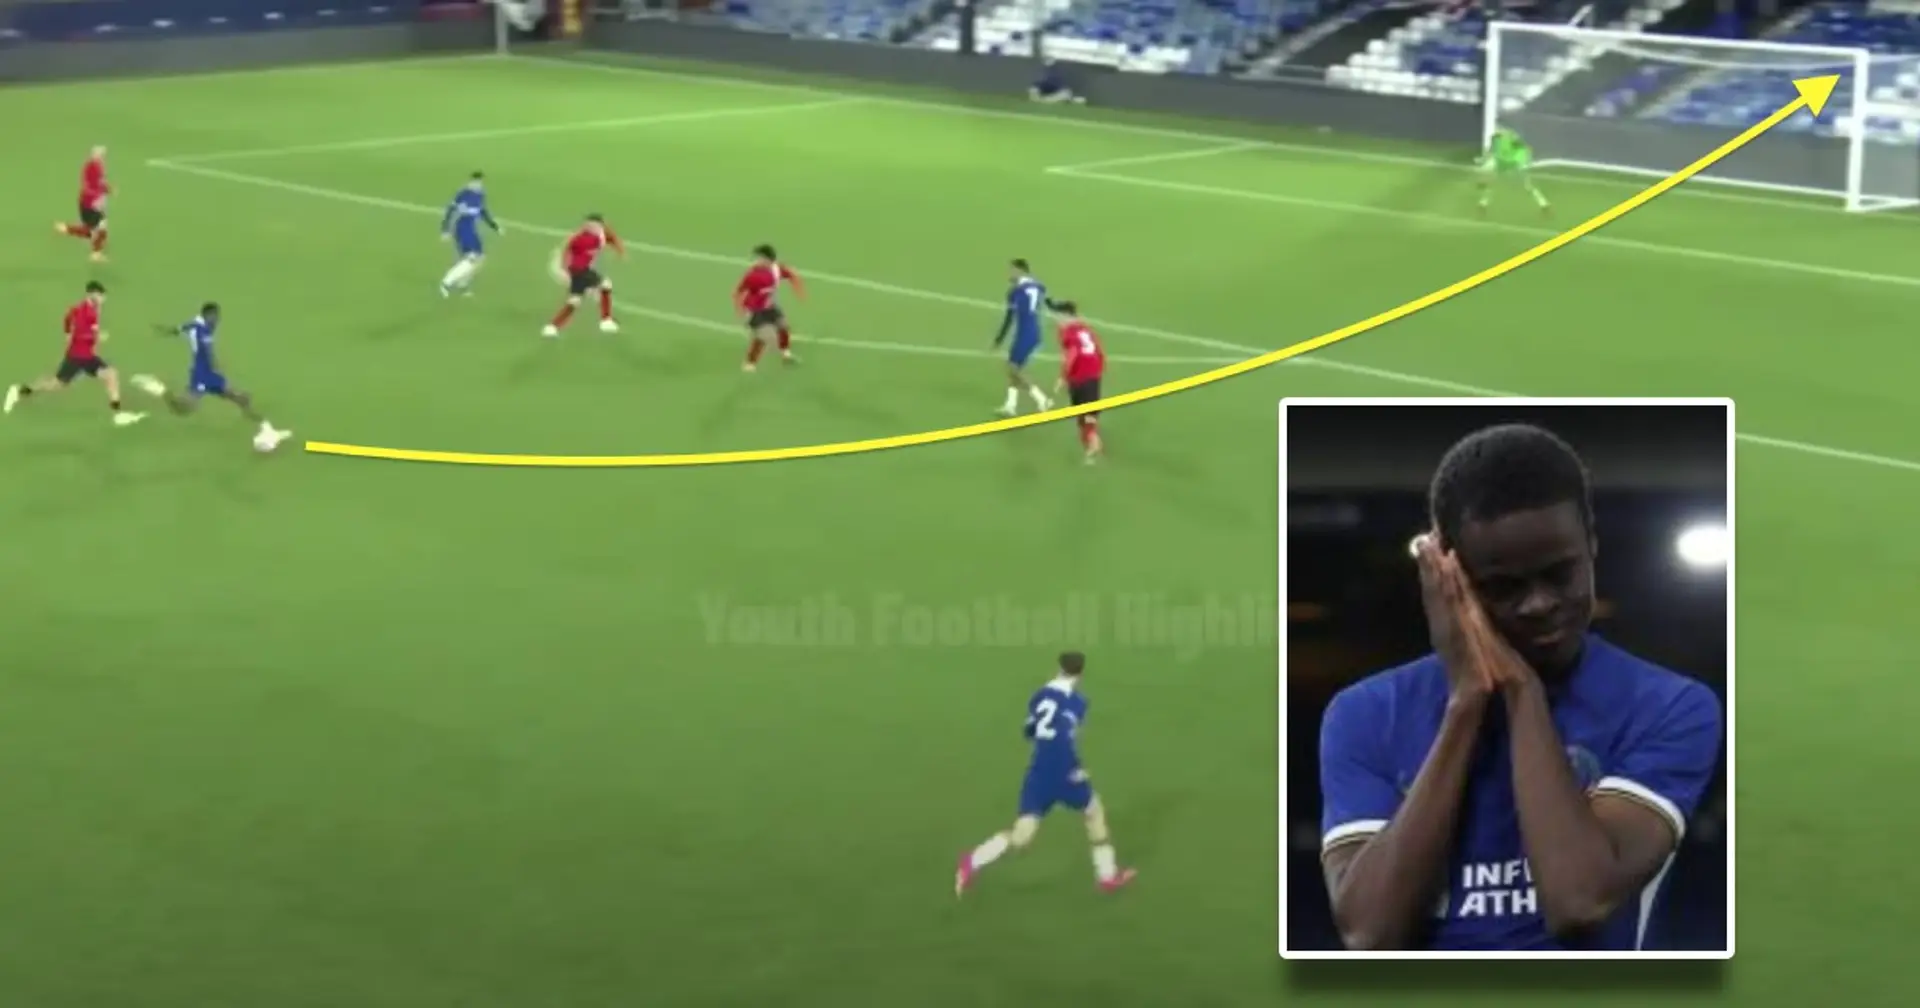 17-year-old Chelsea winger scores again, now bangs it in top bins from distance